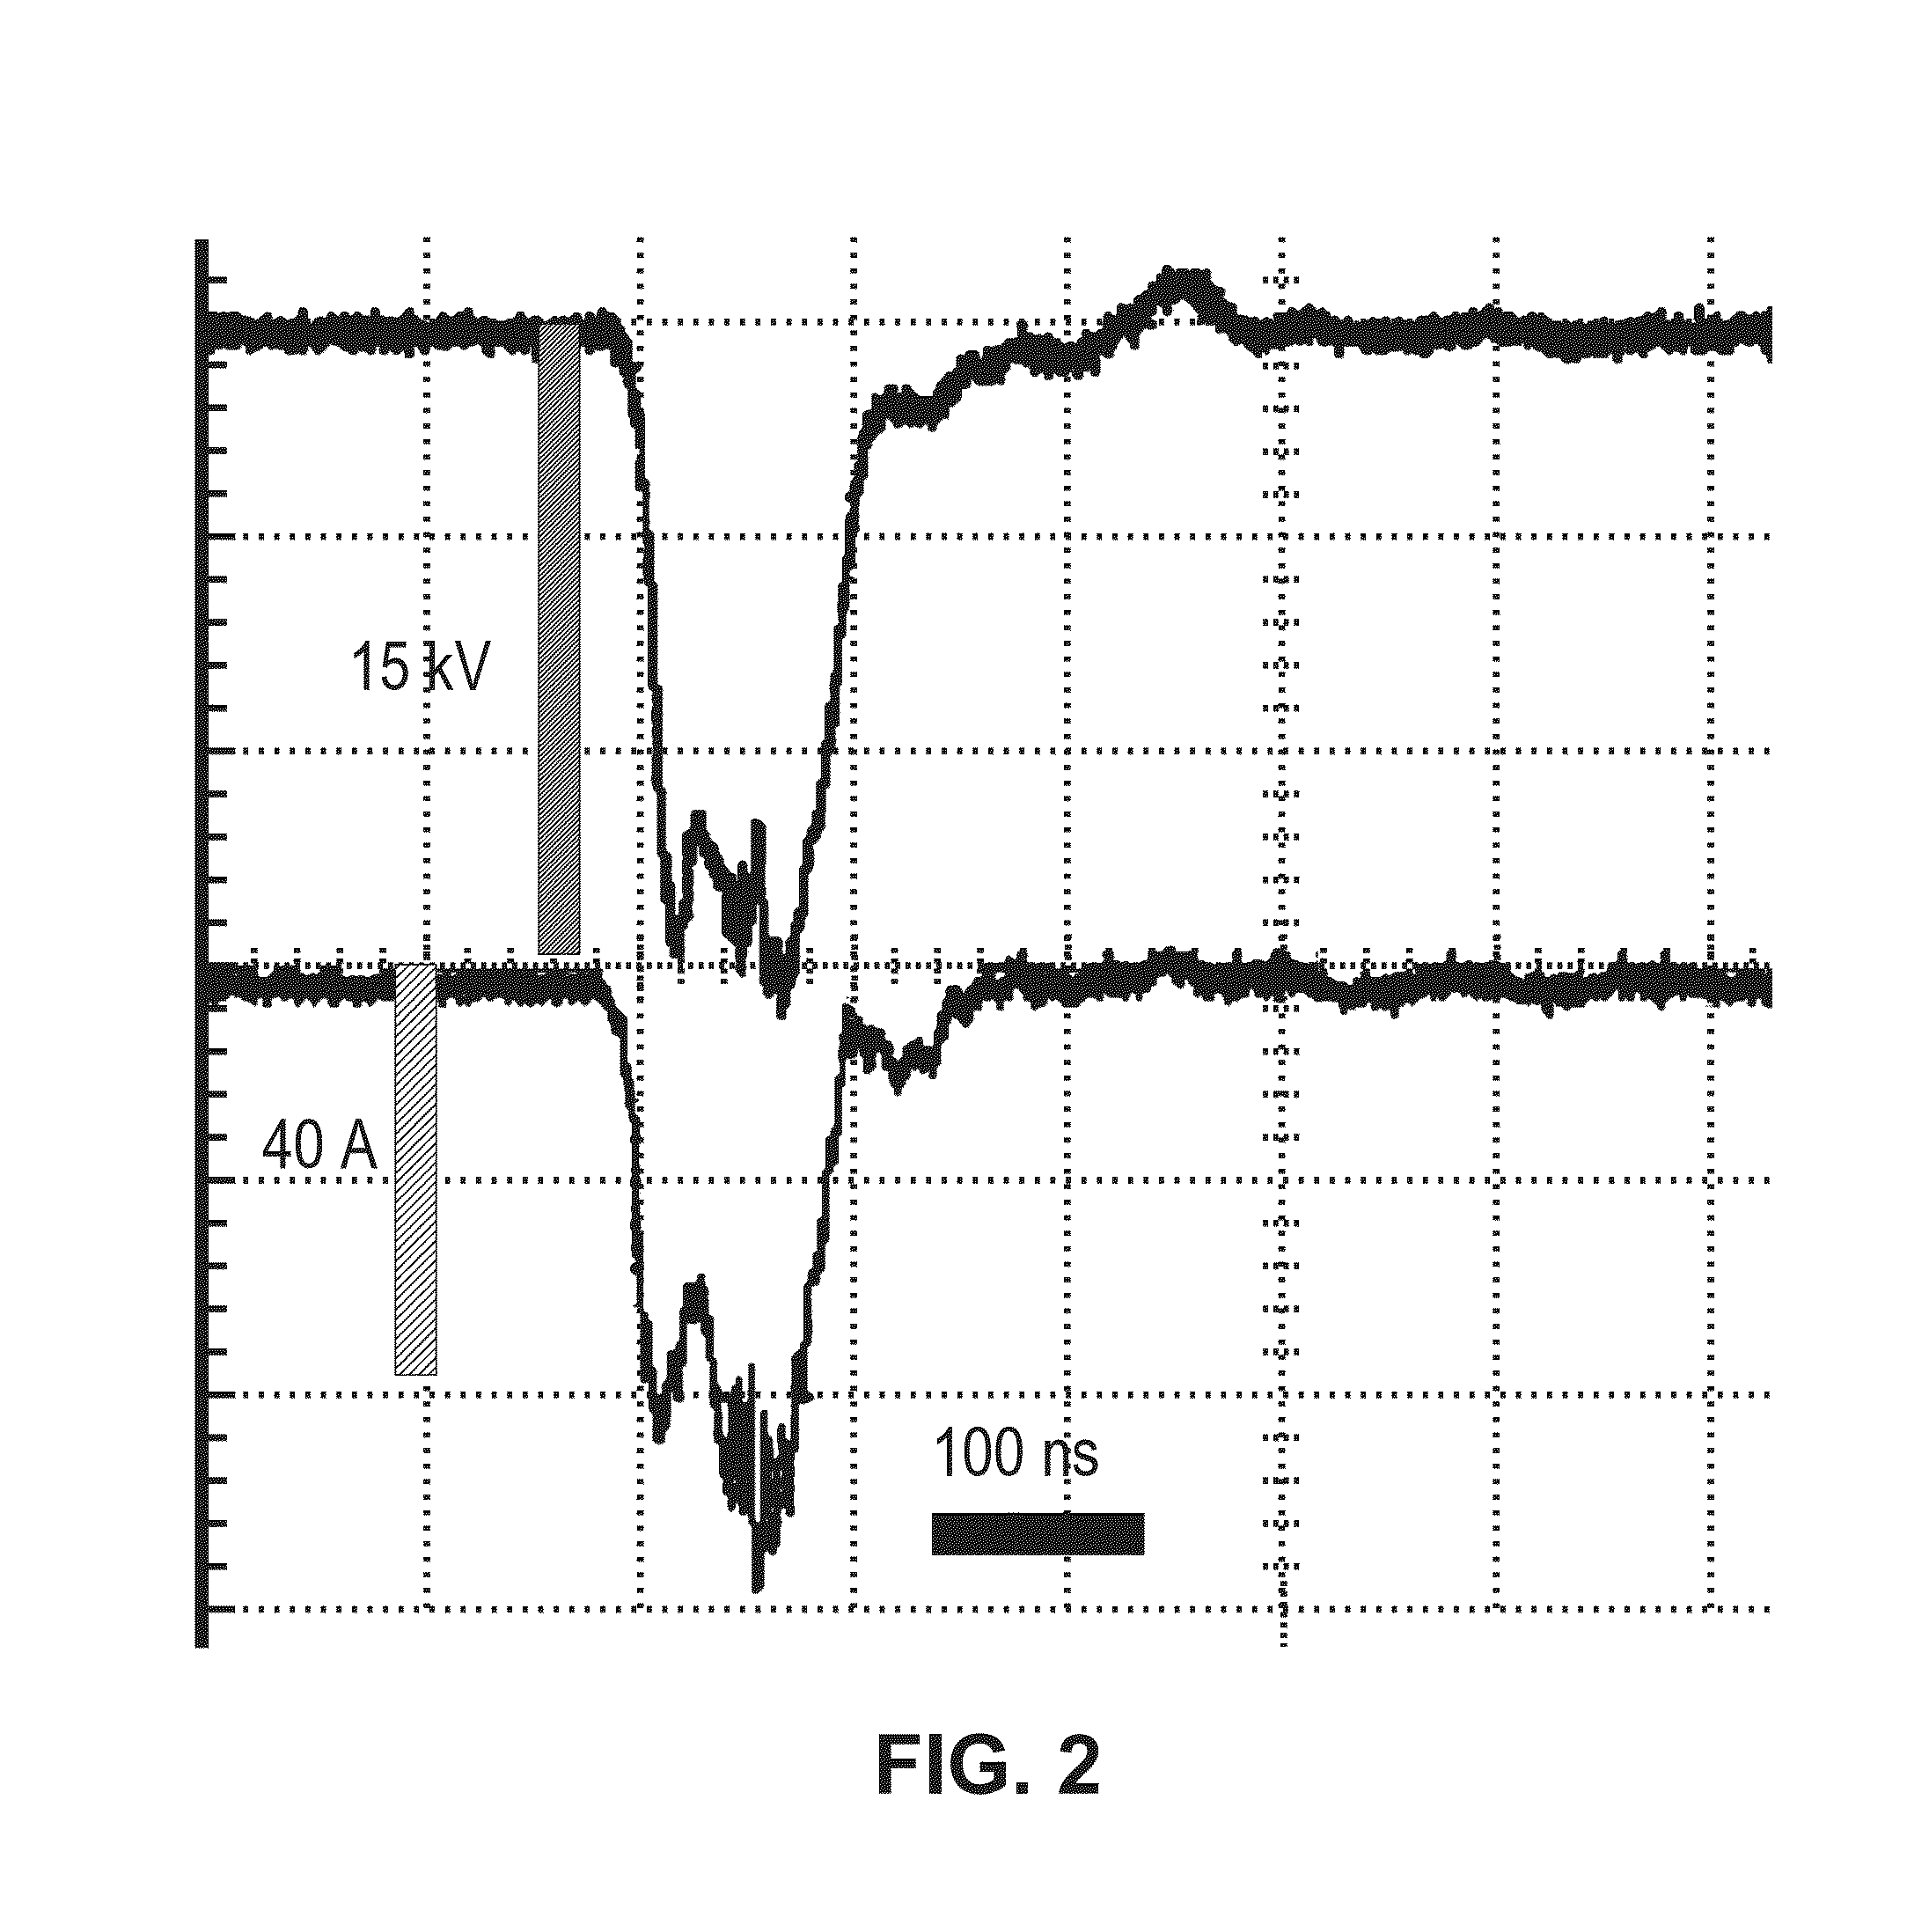 Methods and devices for stimulating an immune response using nanosecond pulsed electric fields